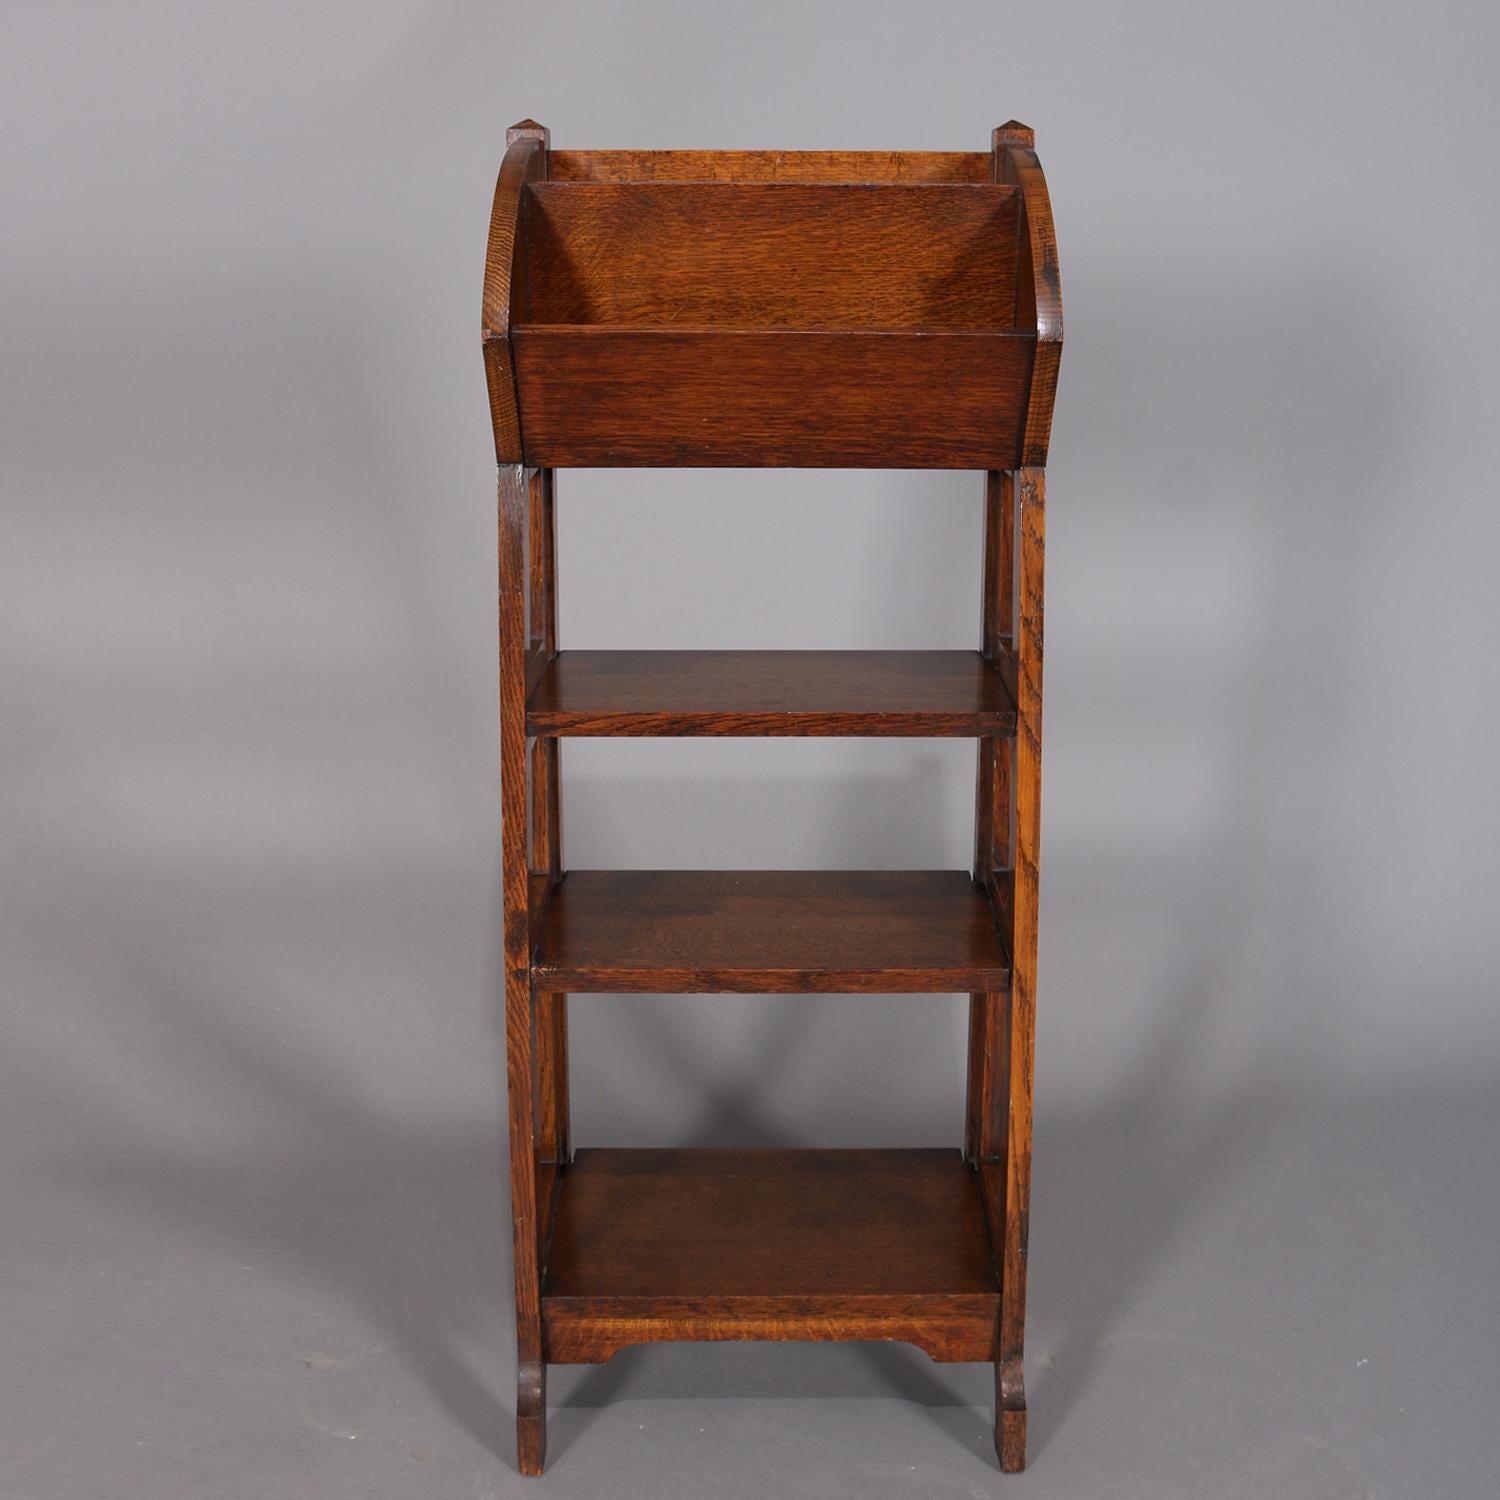 Antique Arts & Crafts Stickley School oak magazine rack features upper divided tray above three graduated lower shelves with open sides, circa 1910

Measures: 40